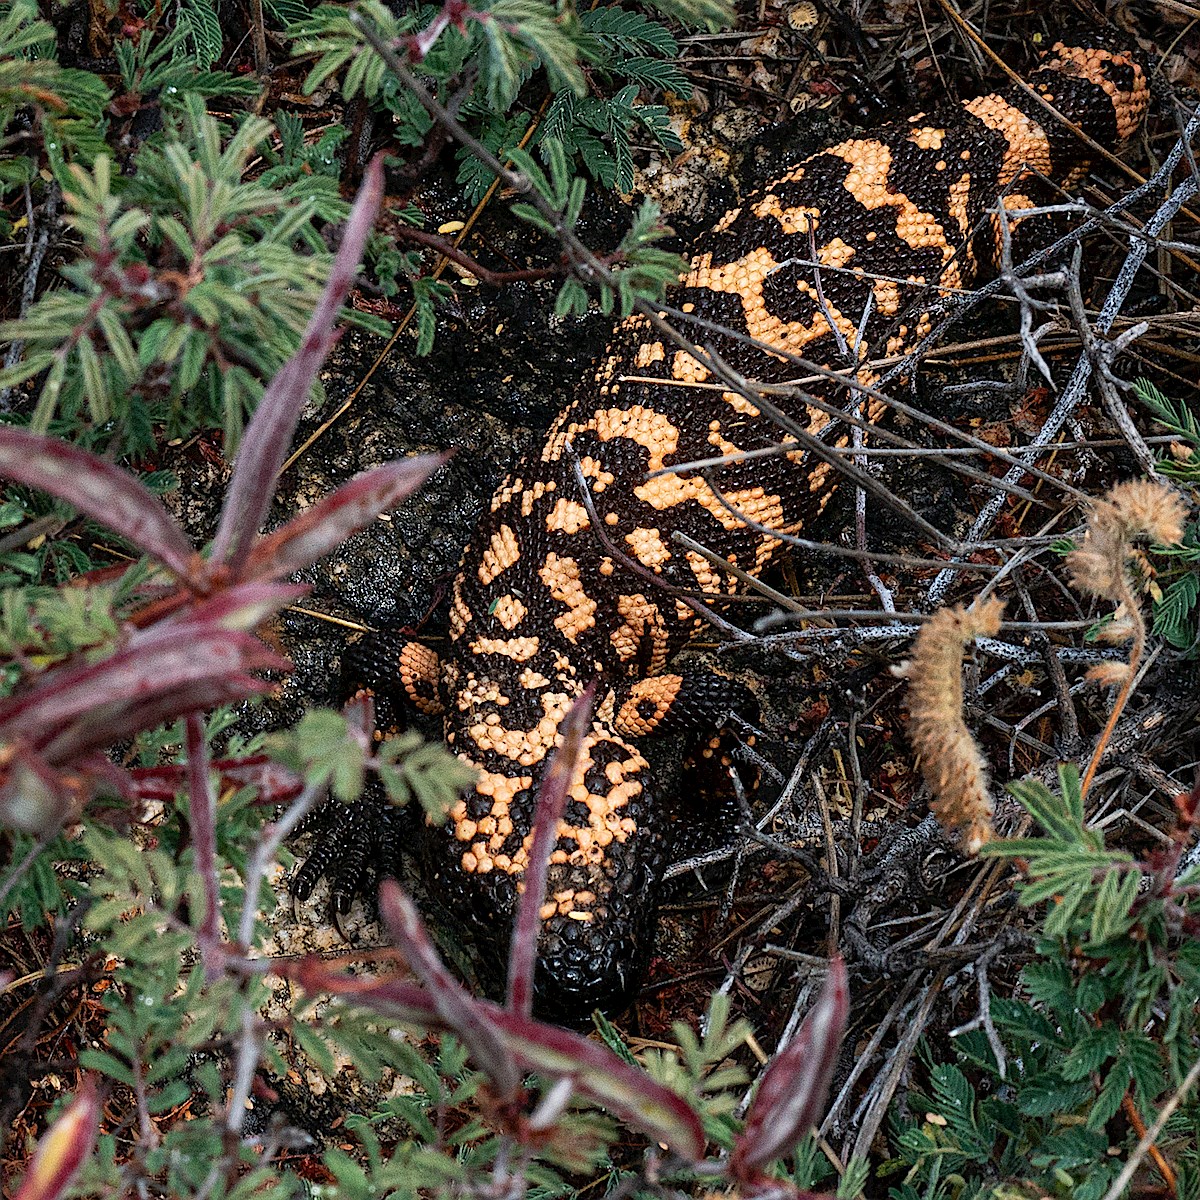 Gila Monster near the Babad Do'ag Trail. May 2019.